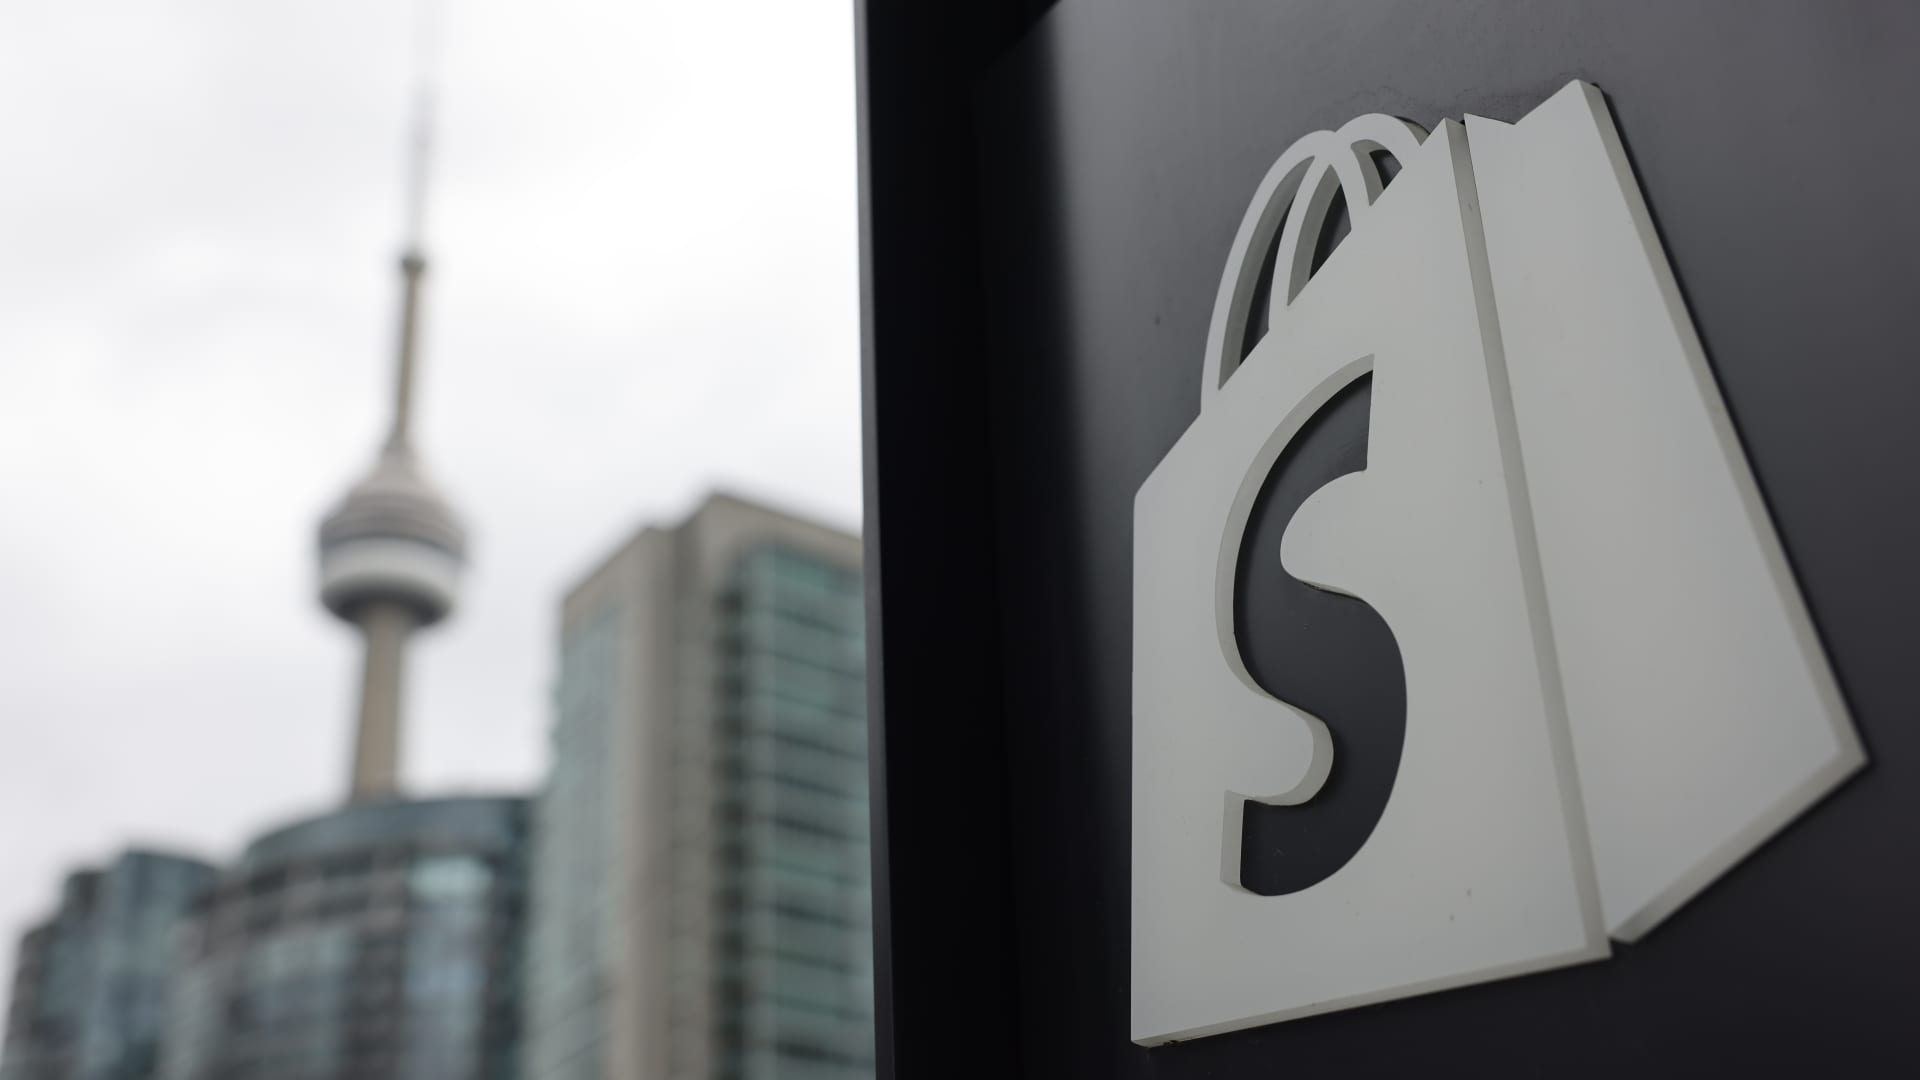 The Shopify logo is pictured outside the The Well building on Spadina Ave. in Toronto.